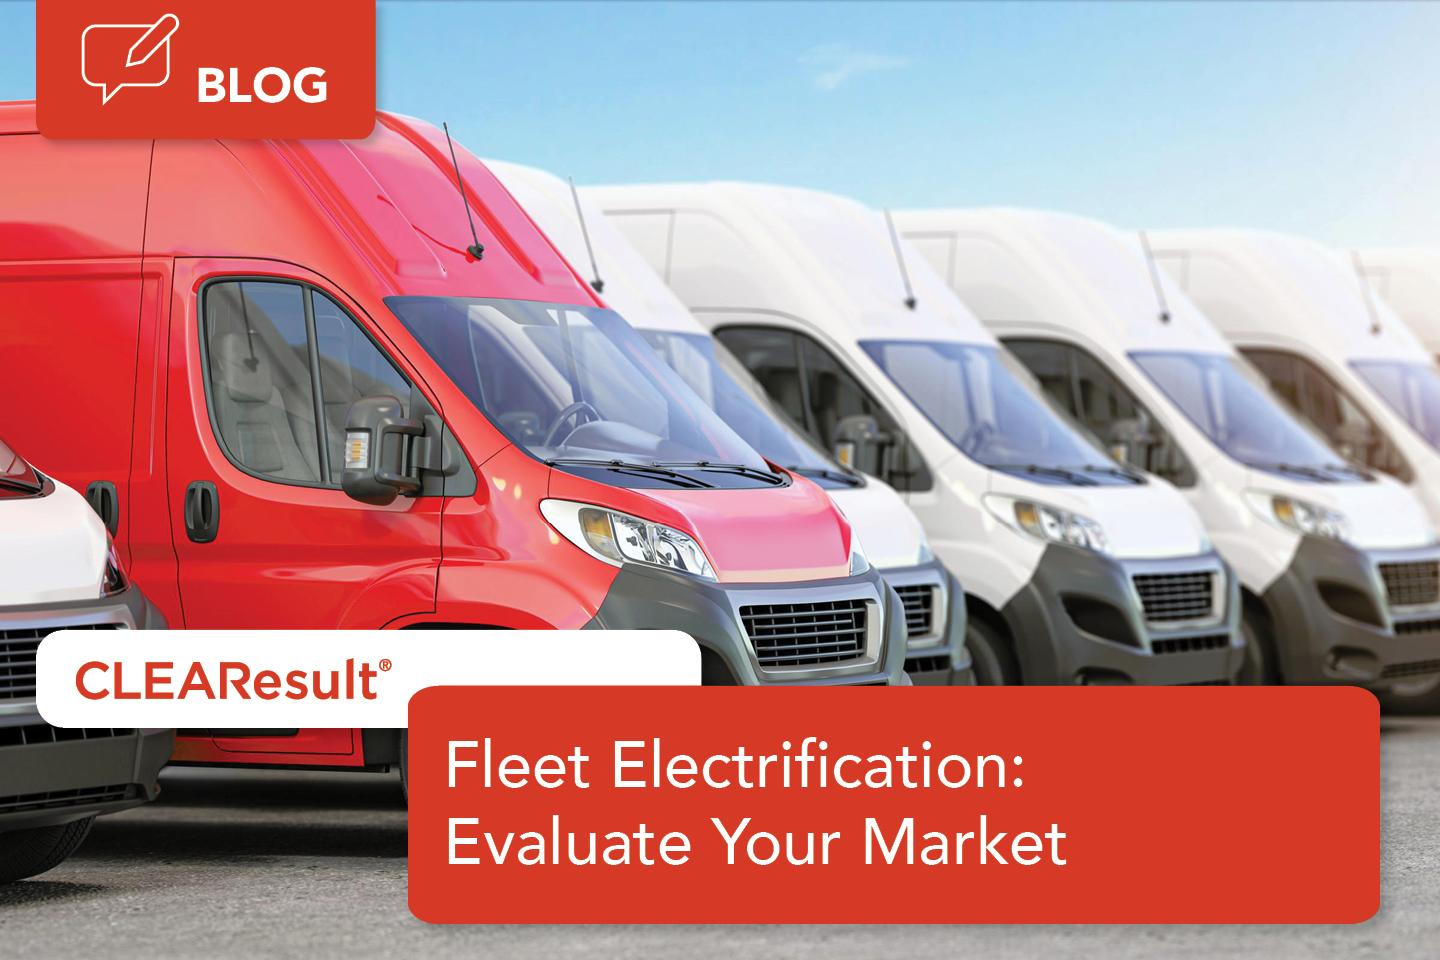 Getting started with Fleet Electrification: Evaluate Your Market 